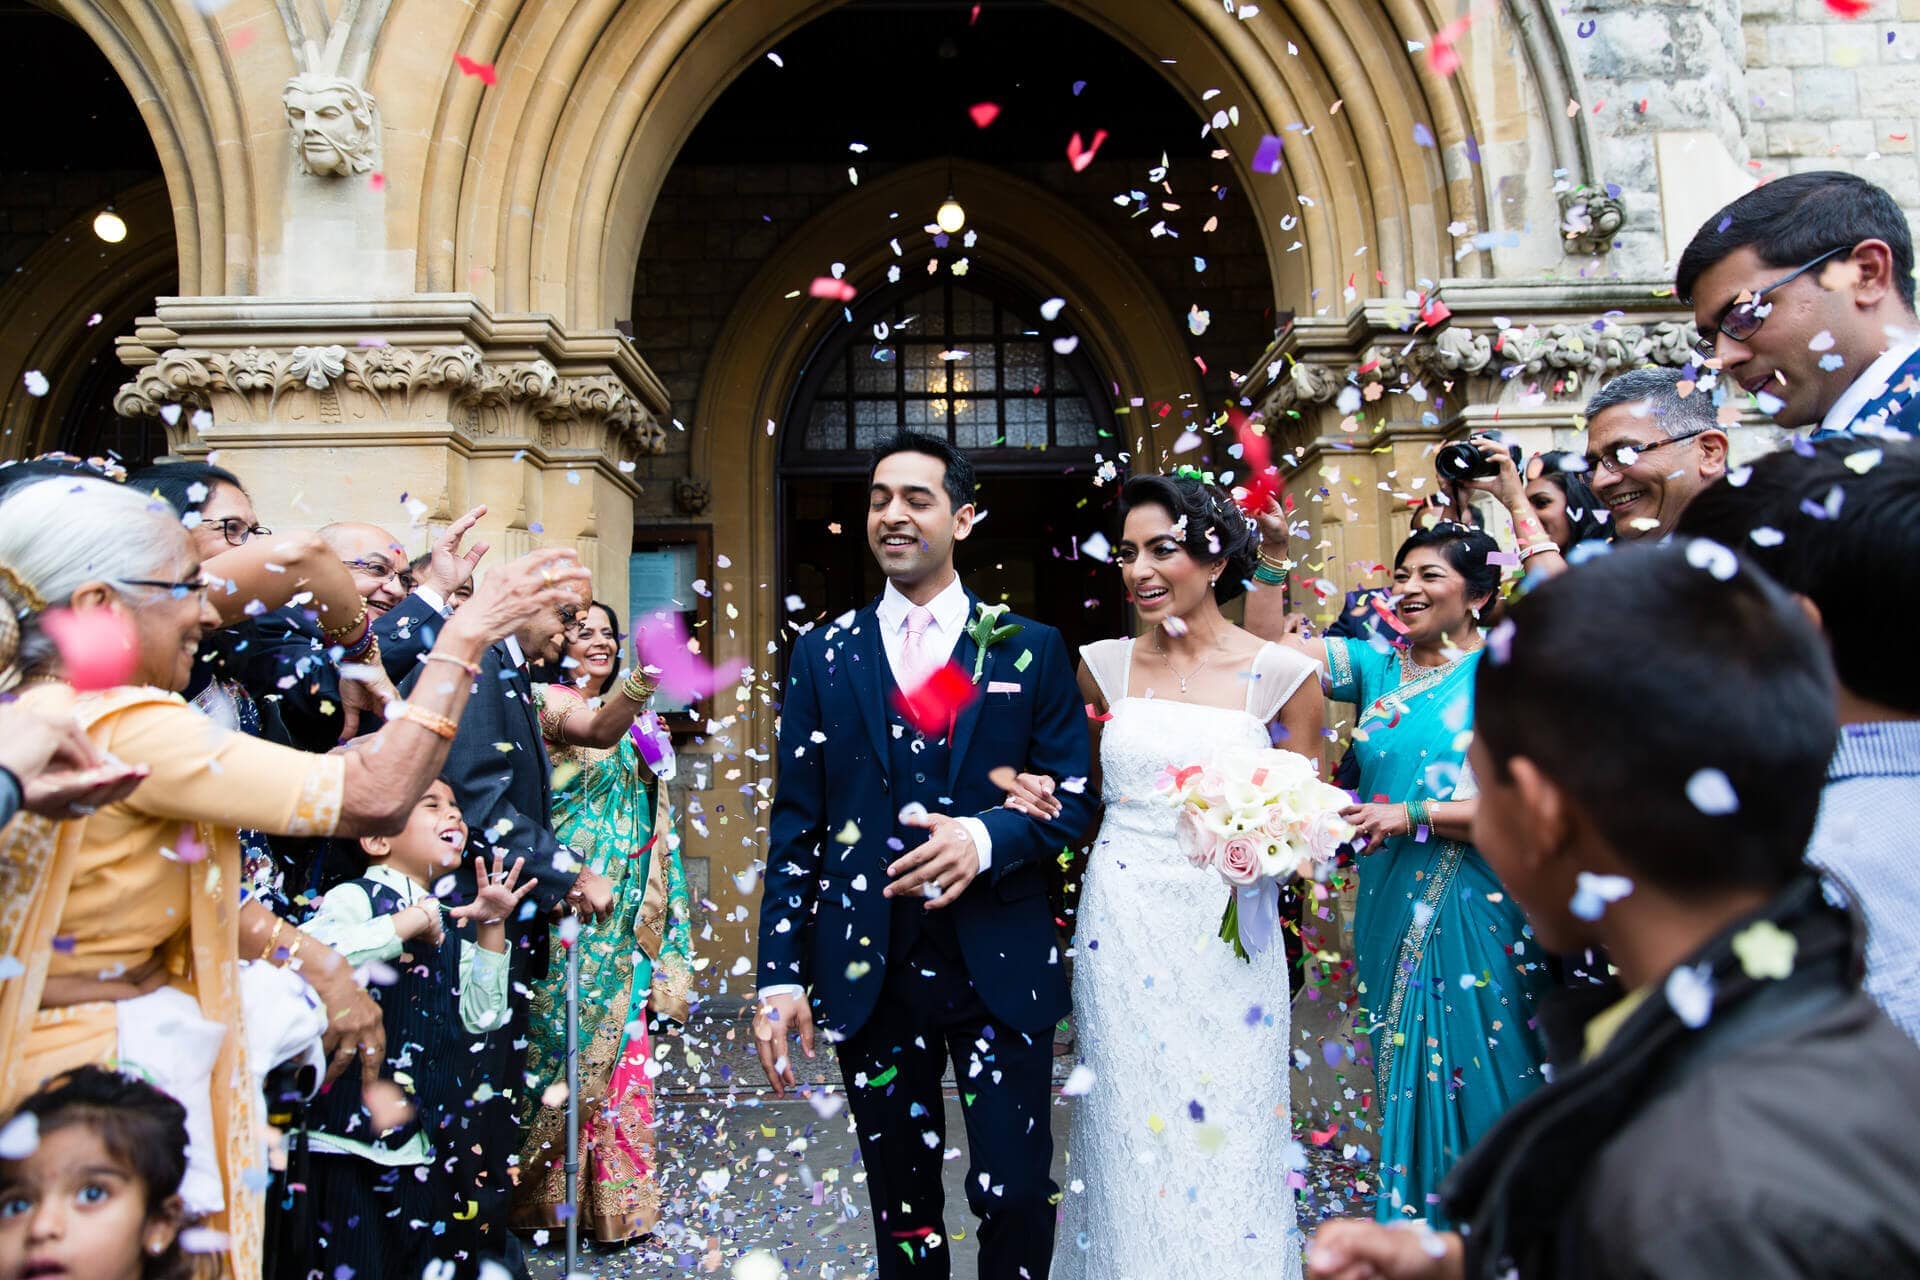 Confetti being thrown at the bride and groom